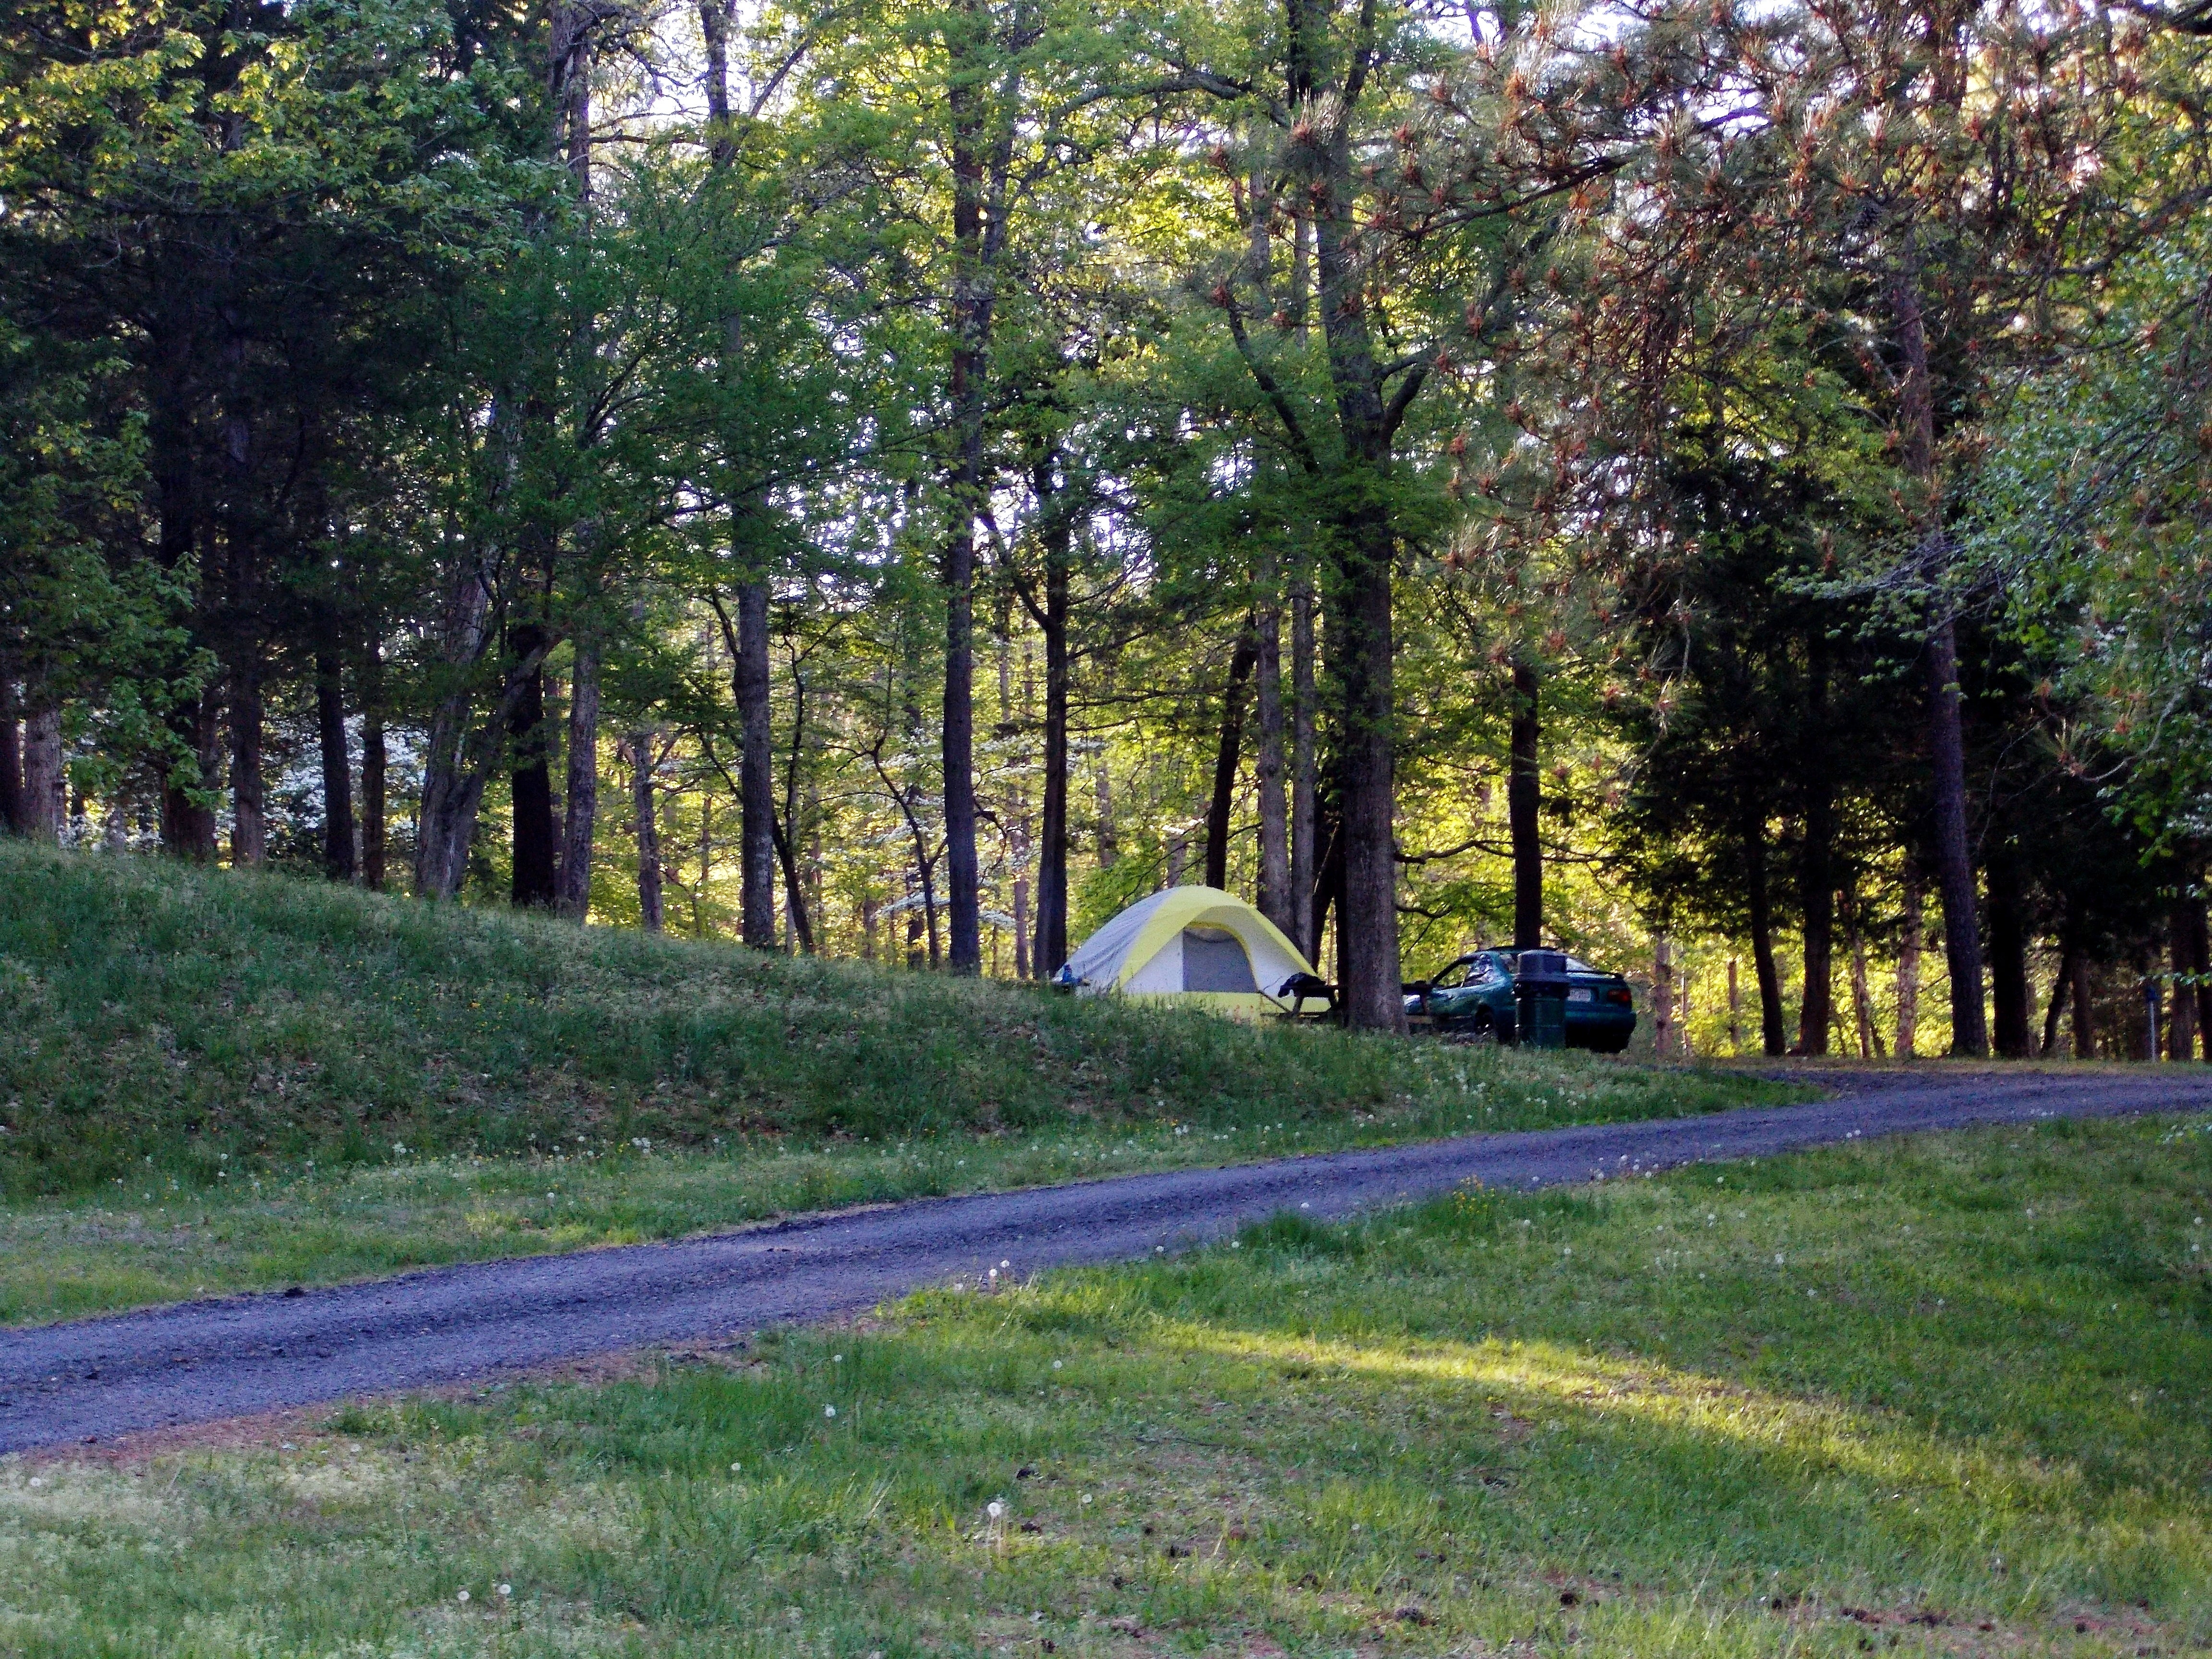 The tent sites are grassy and level ... for the most part.